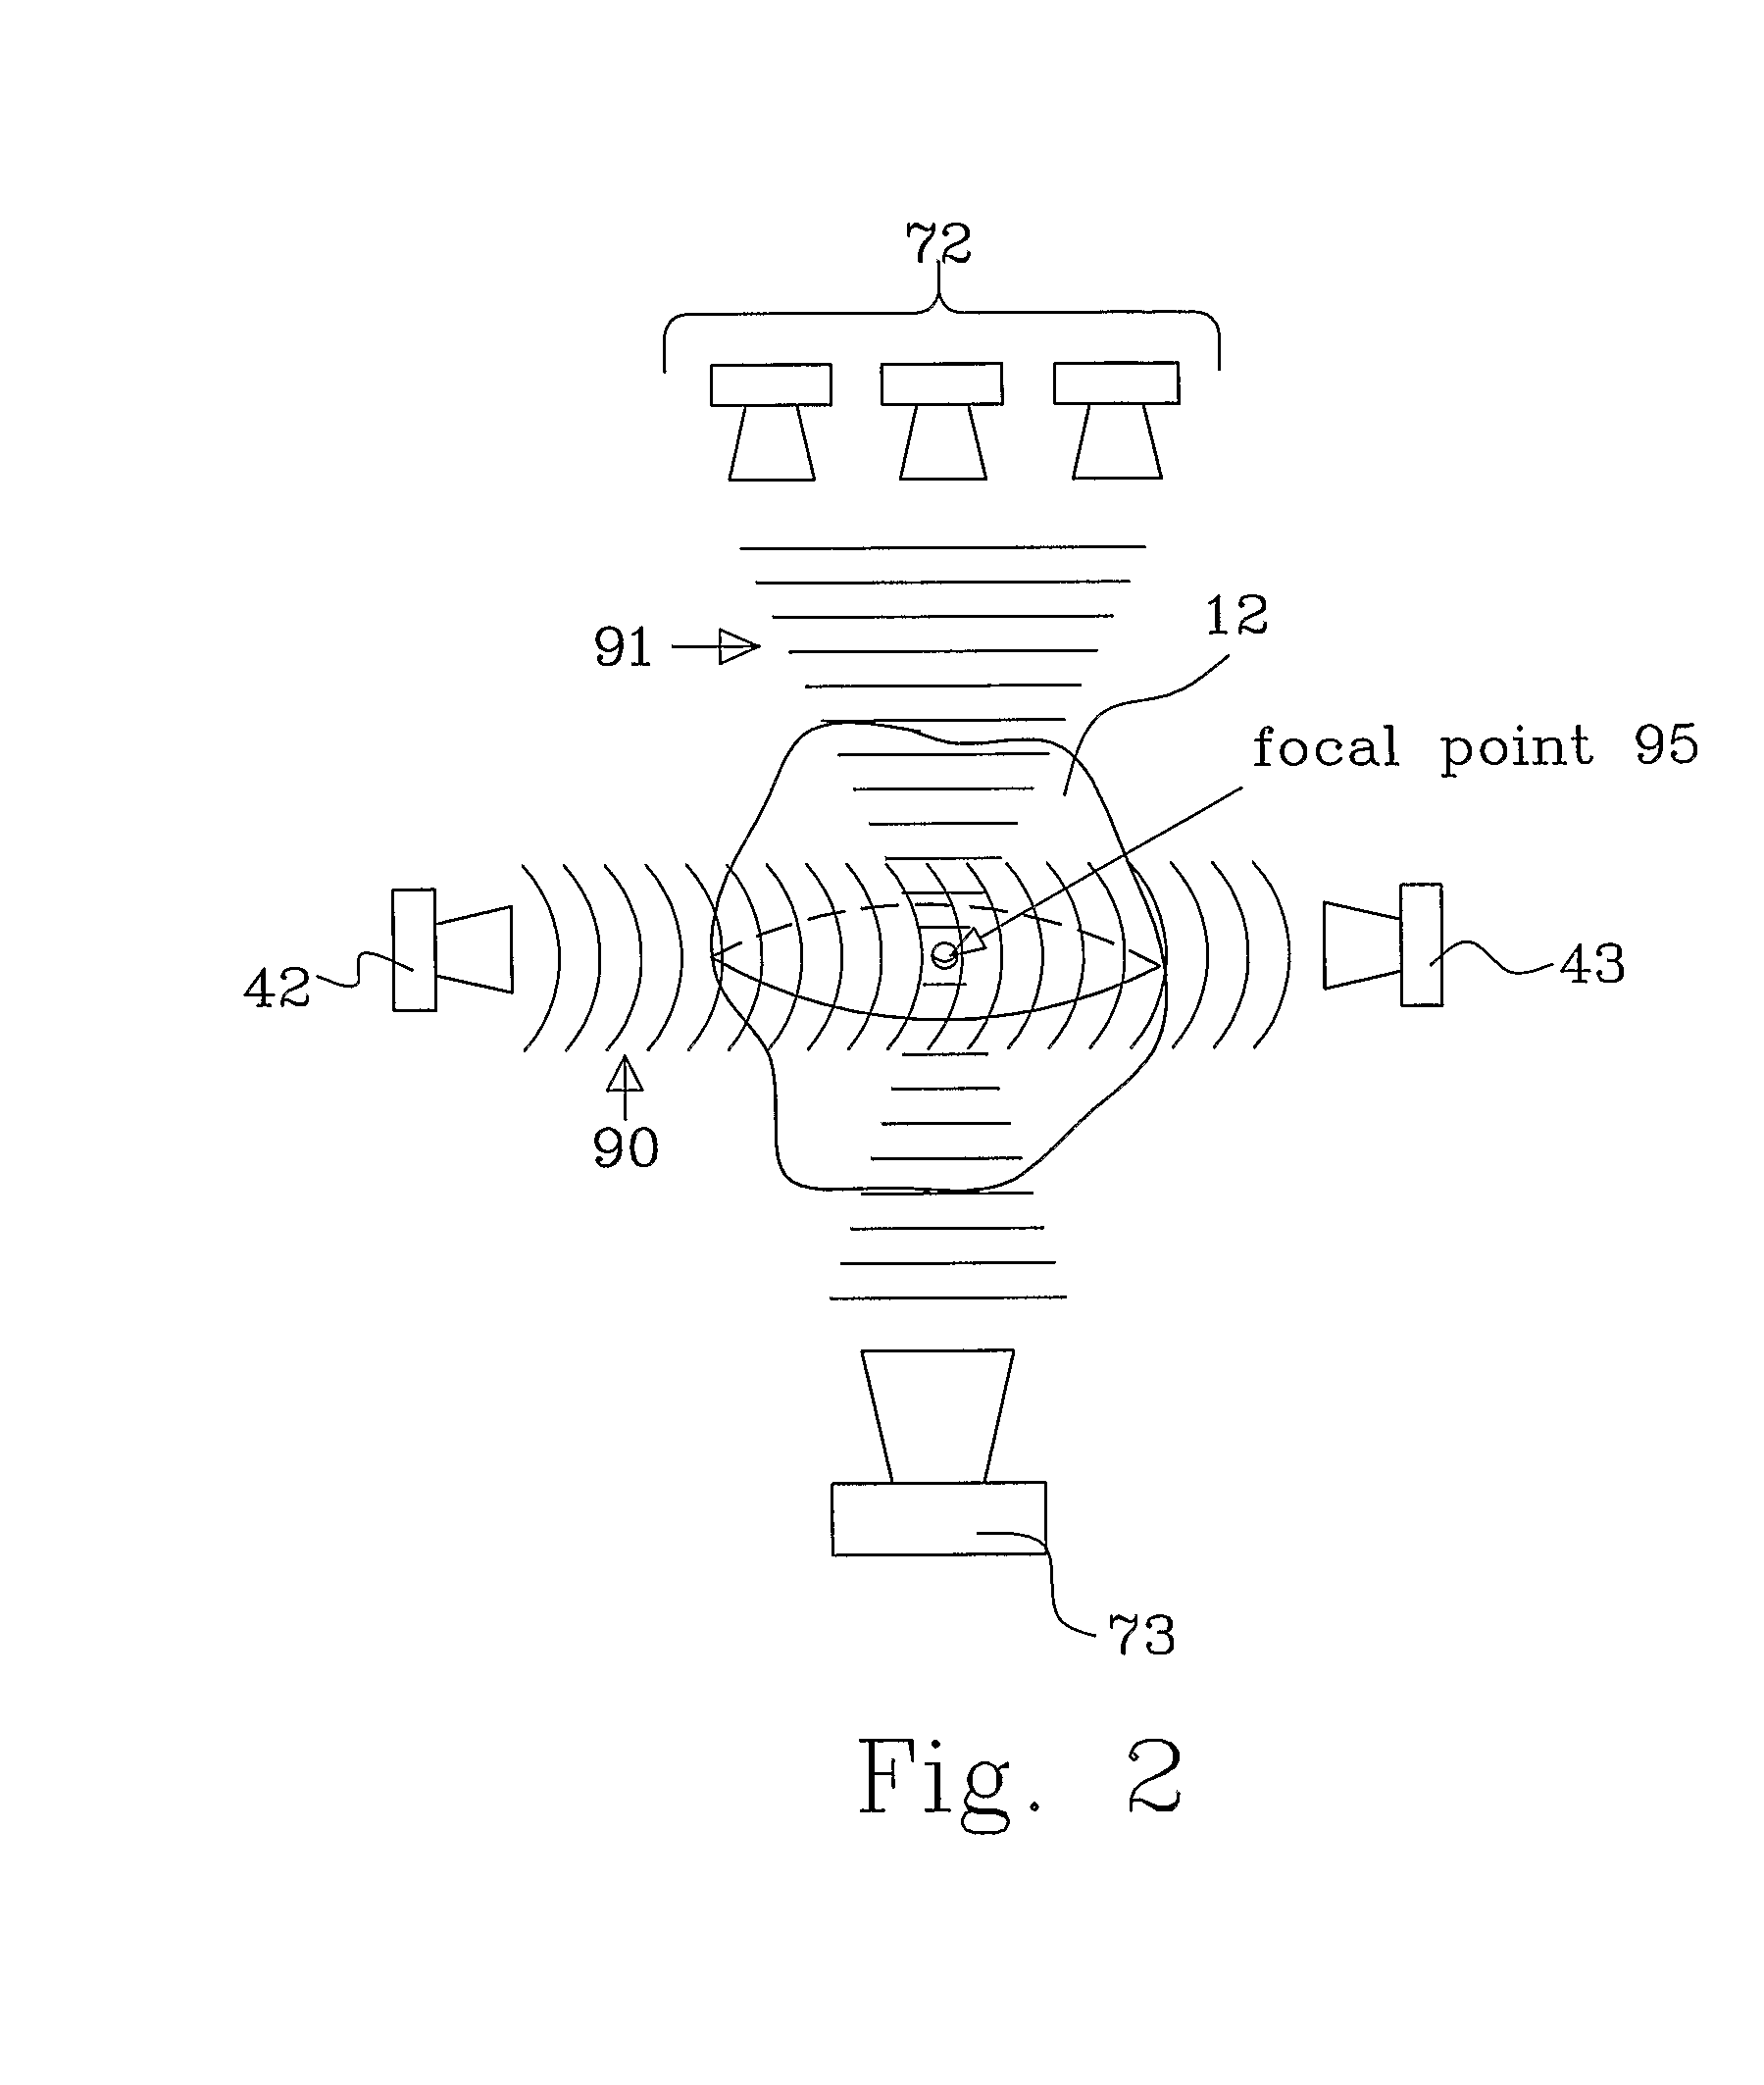 Apparatus and Method for Determining Physical Parameters in an Object Using Acousto-Electric Interaction